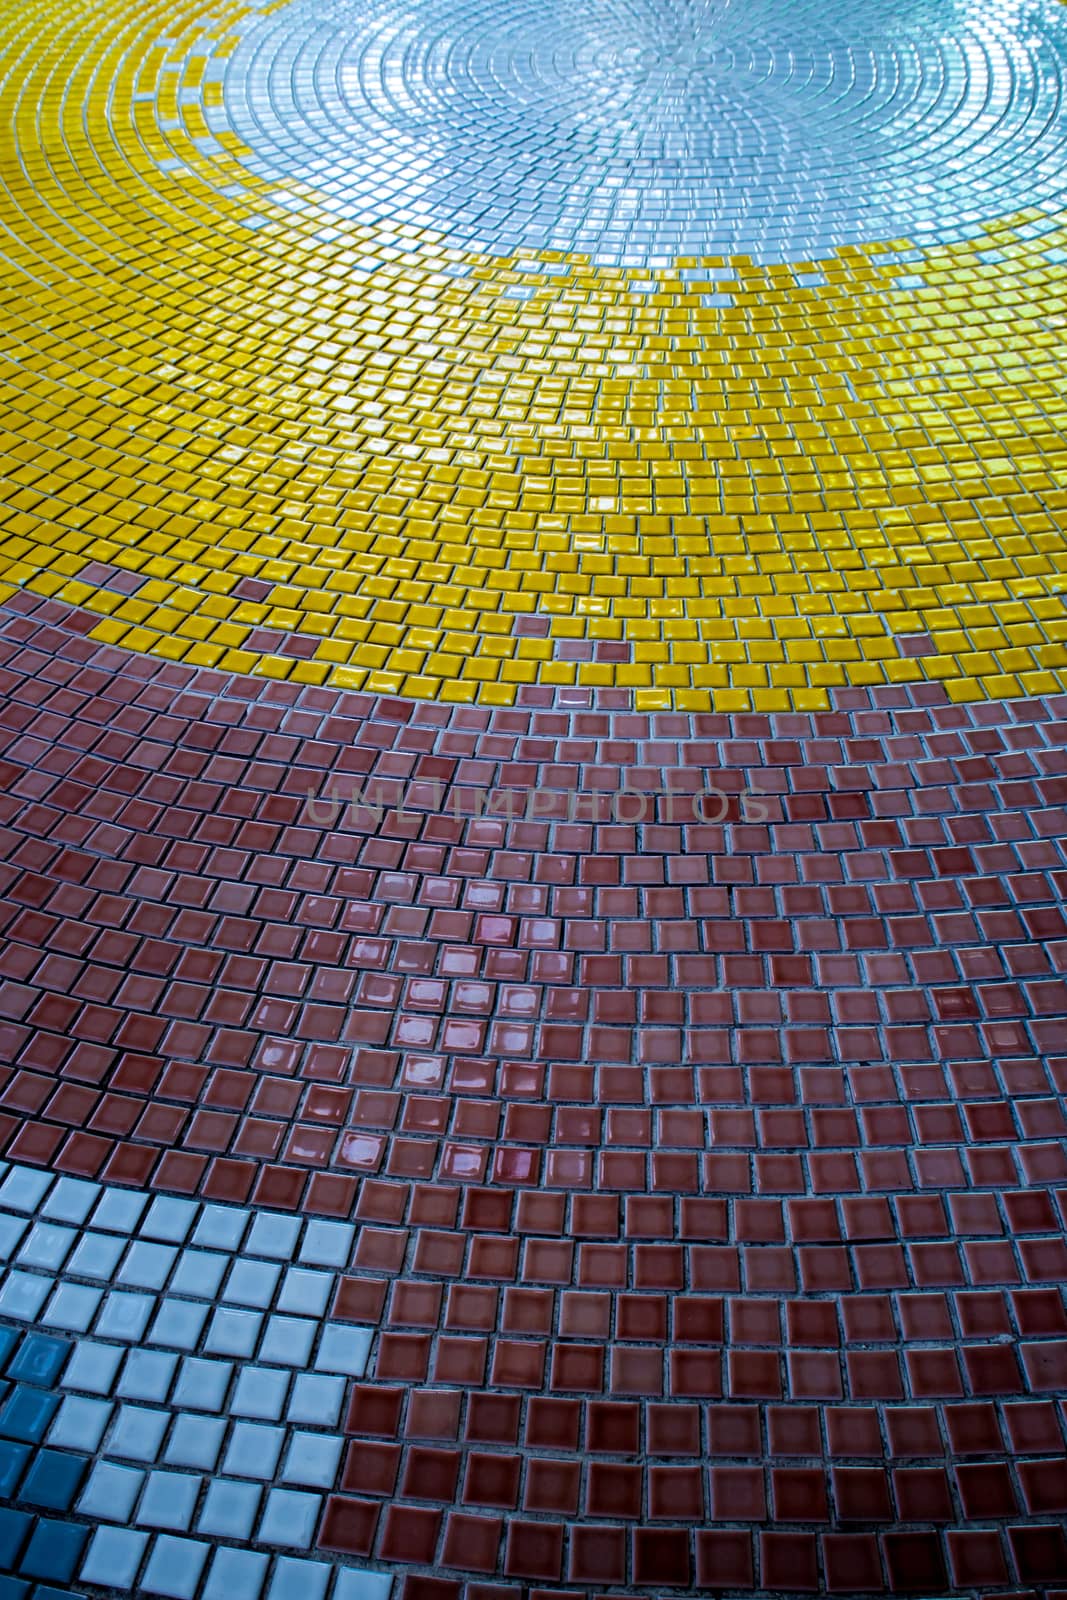 Colorful tiles on the floor of hall by Satakorn